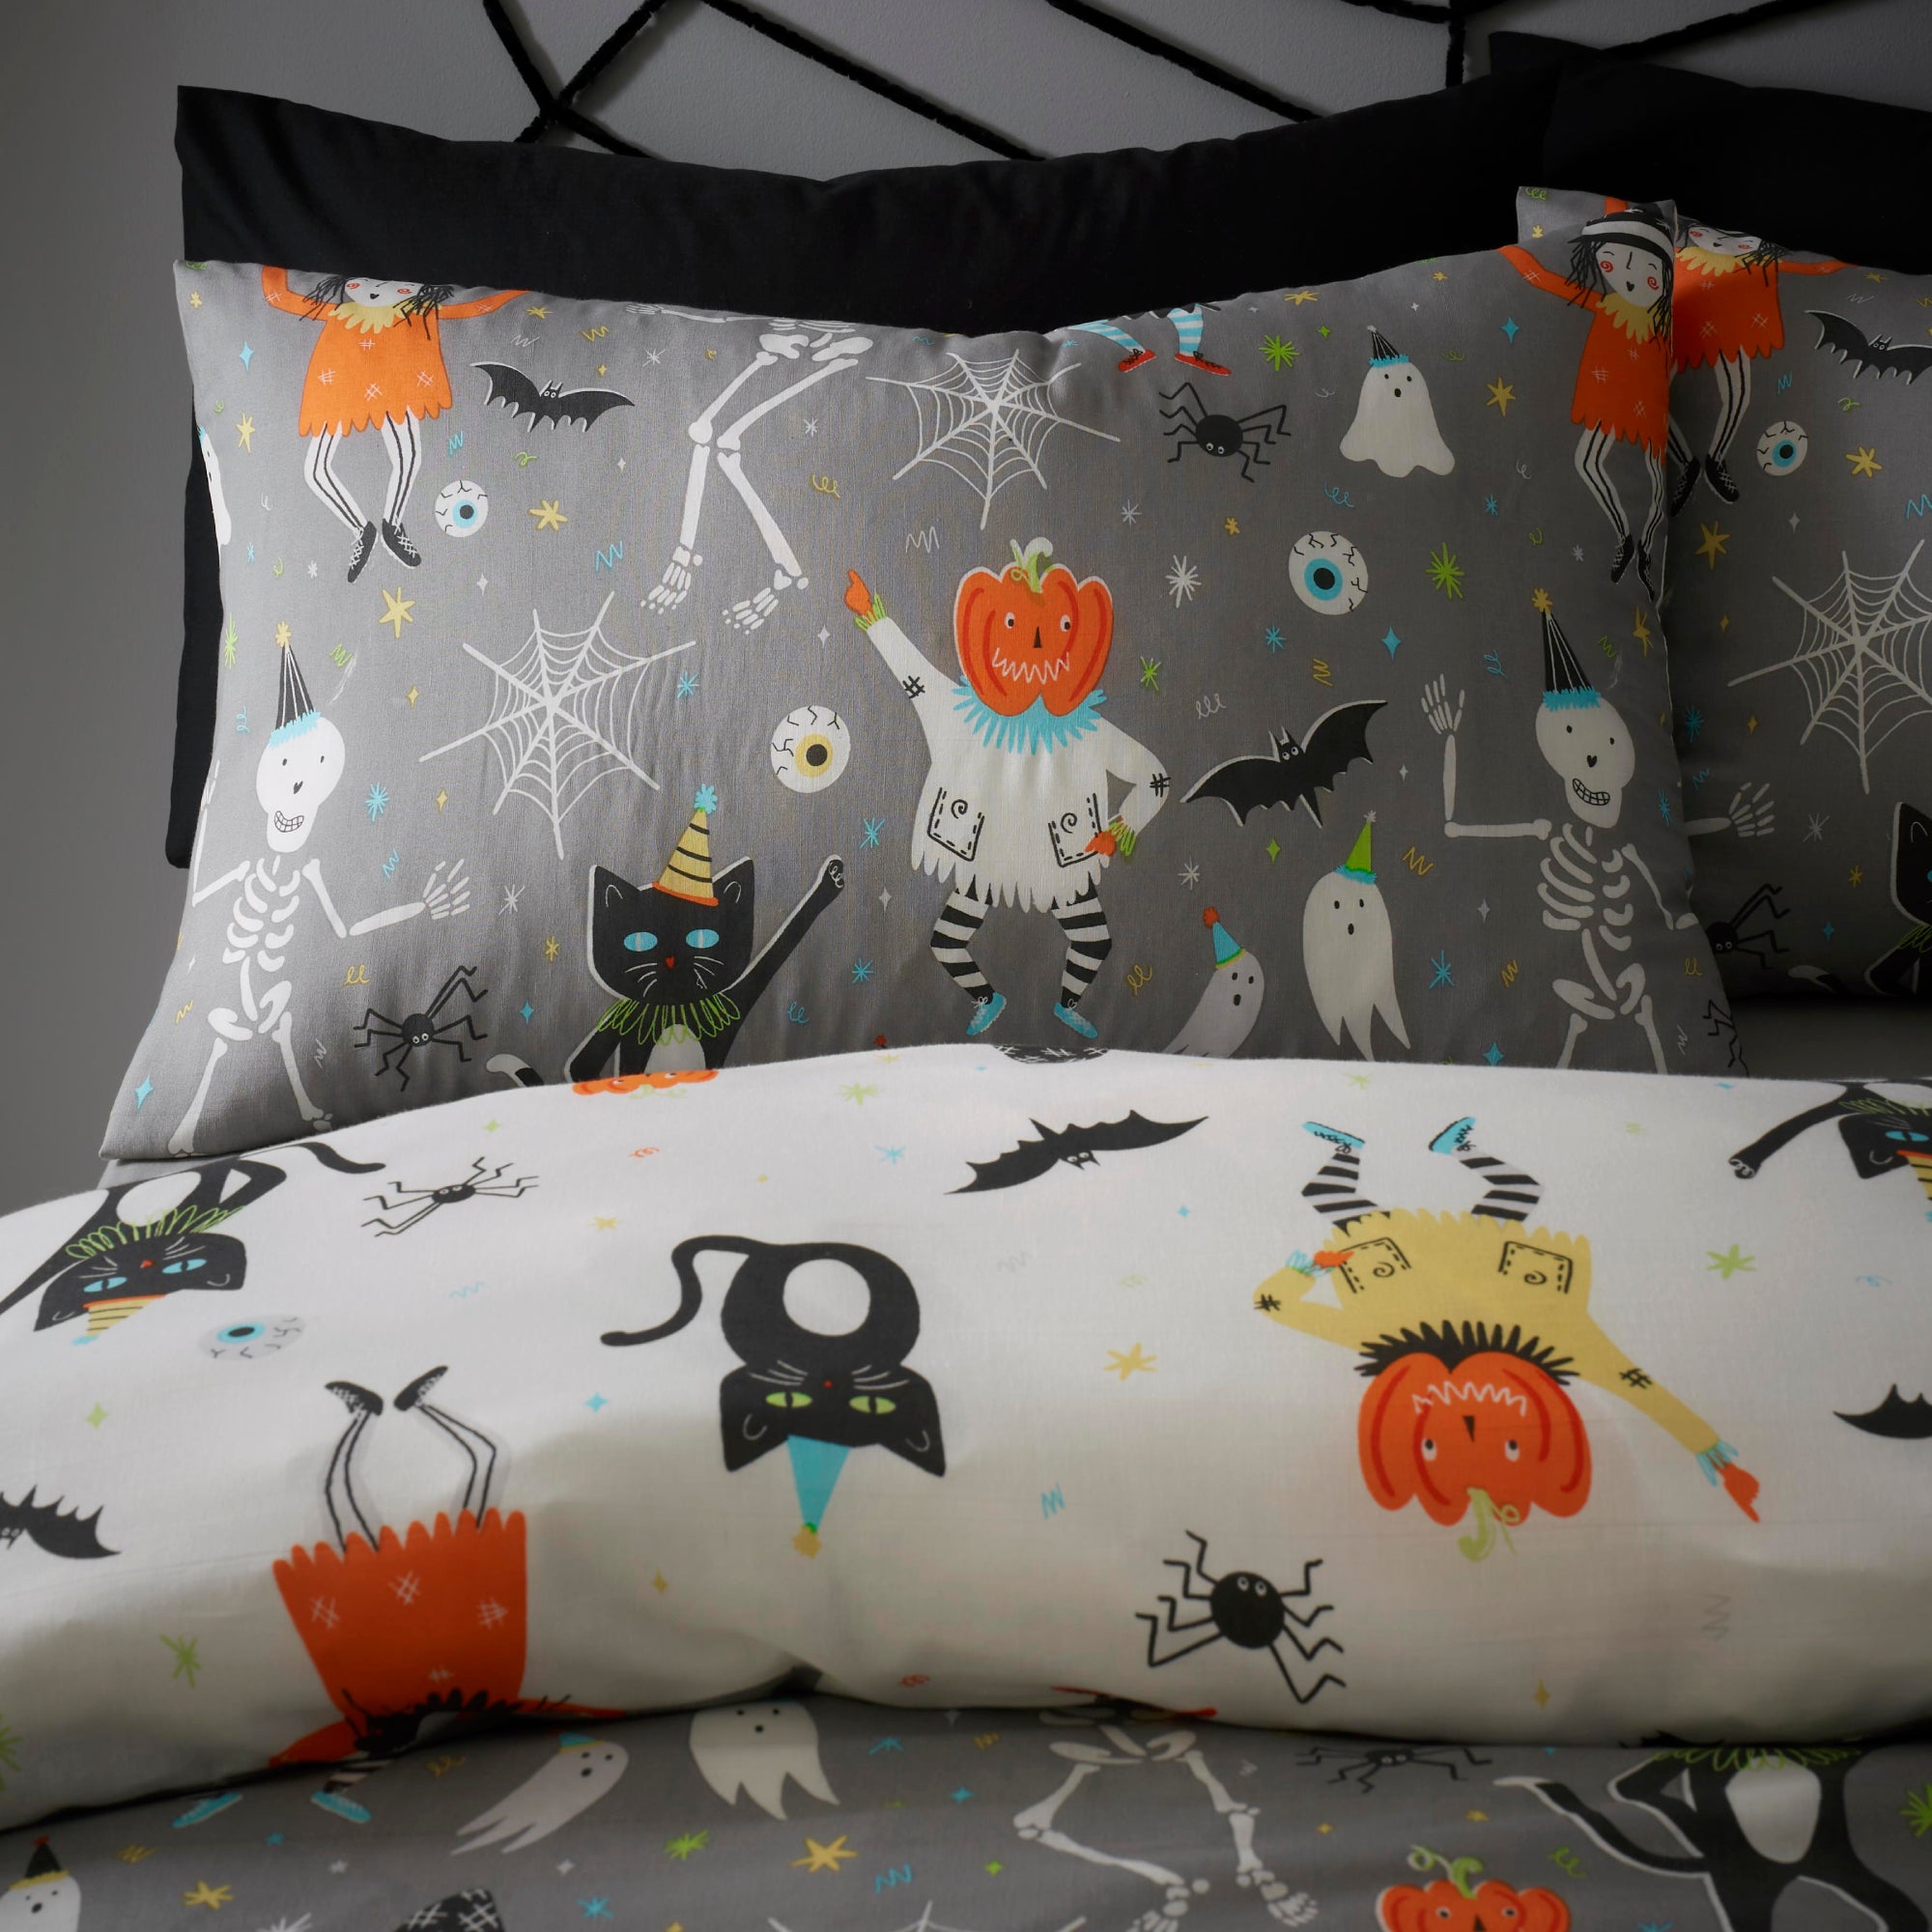 Duvet Cover Set Halloween Party by Bedlam in Grey